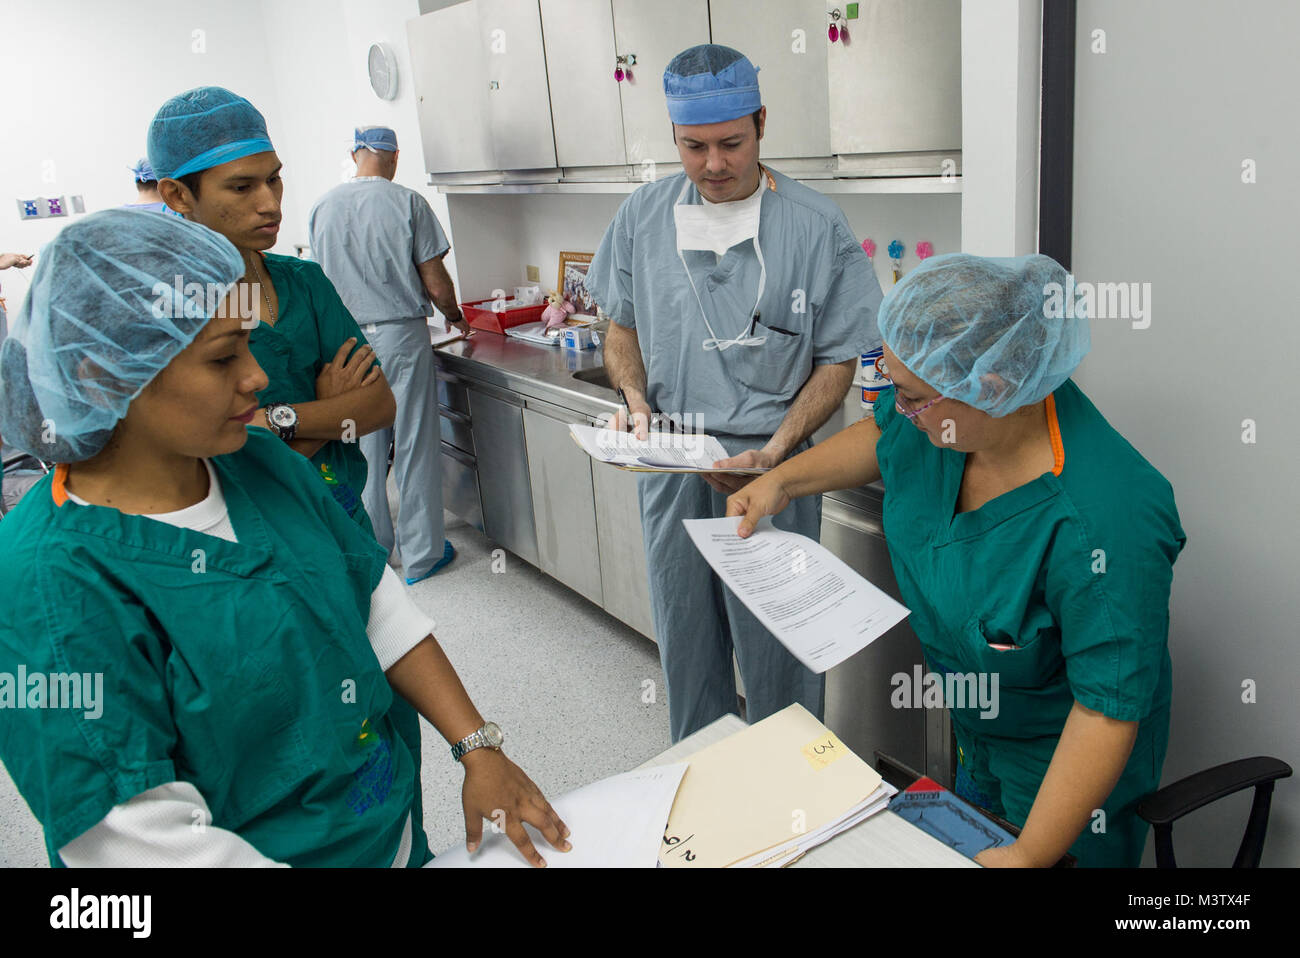 Ophthalmologist Maj. Richard Townley, a corneal specialist, goes over surgical charts with the local nurses at the Centro Hospitalario Luis 'Chicho' Fabrega during a medical readiness training exercise in Santiago, Panama, Feb. 6, 2017. The U.S. military medical team was in Panama to help treat individuals with cataracts that otherwise would have gone untreated. Medical readiness training exercises provide U.S. military personnel training in delivery of medical care in austere conditions, promote diplomatic relations between the U.S. and host nations in Central America and provide humanitarian Stock Photo